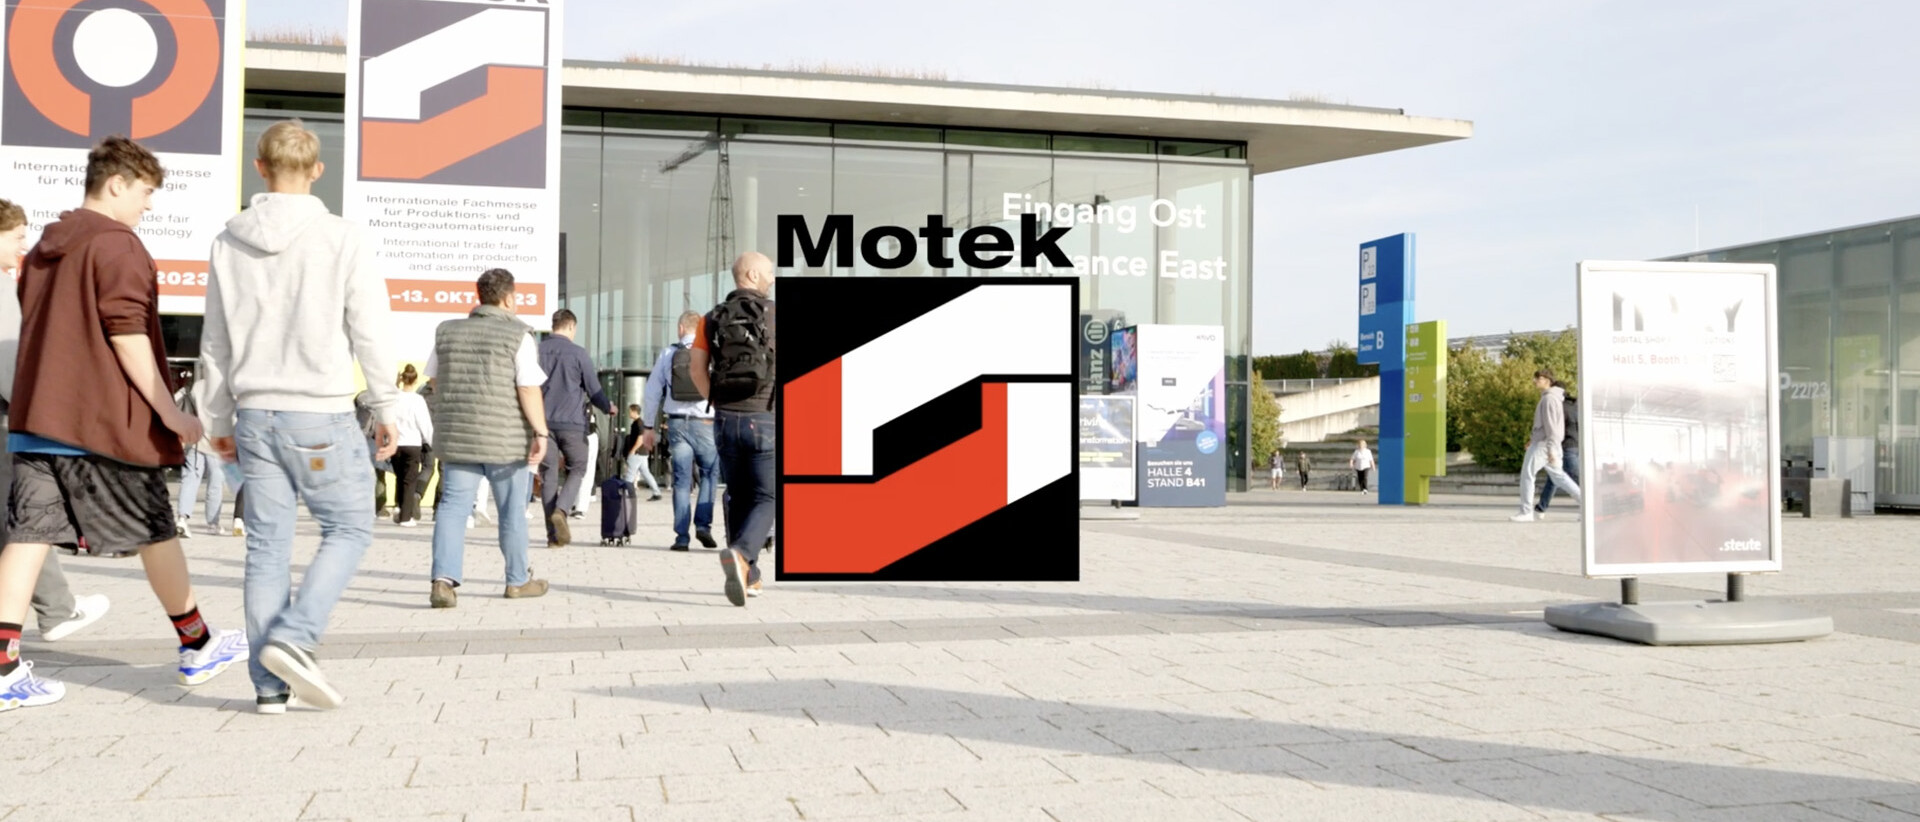 Motek Internationale Fachmesse für Produktions- und Montageautomatisierung Innovation Drivers of Production and Assembly Automation at Motek Bondexpo 2023 uai